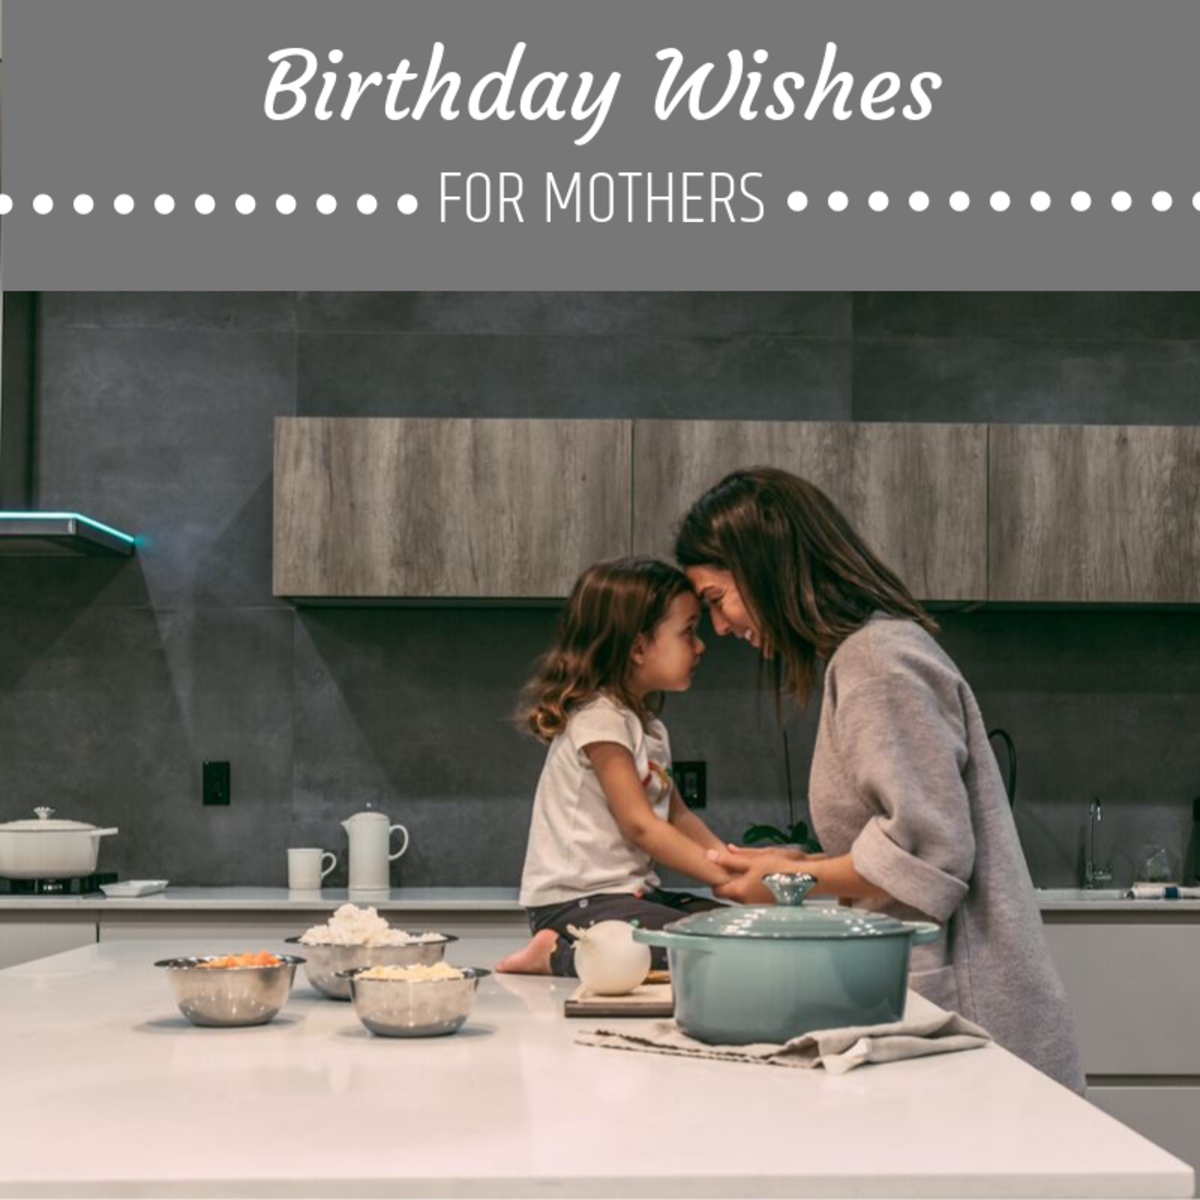 Adorable Quotes and Messages for Mom